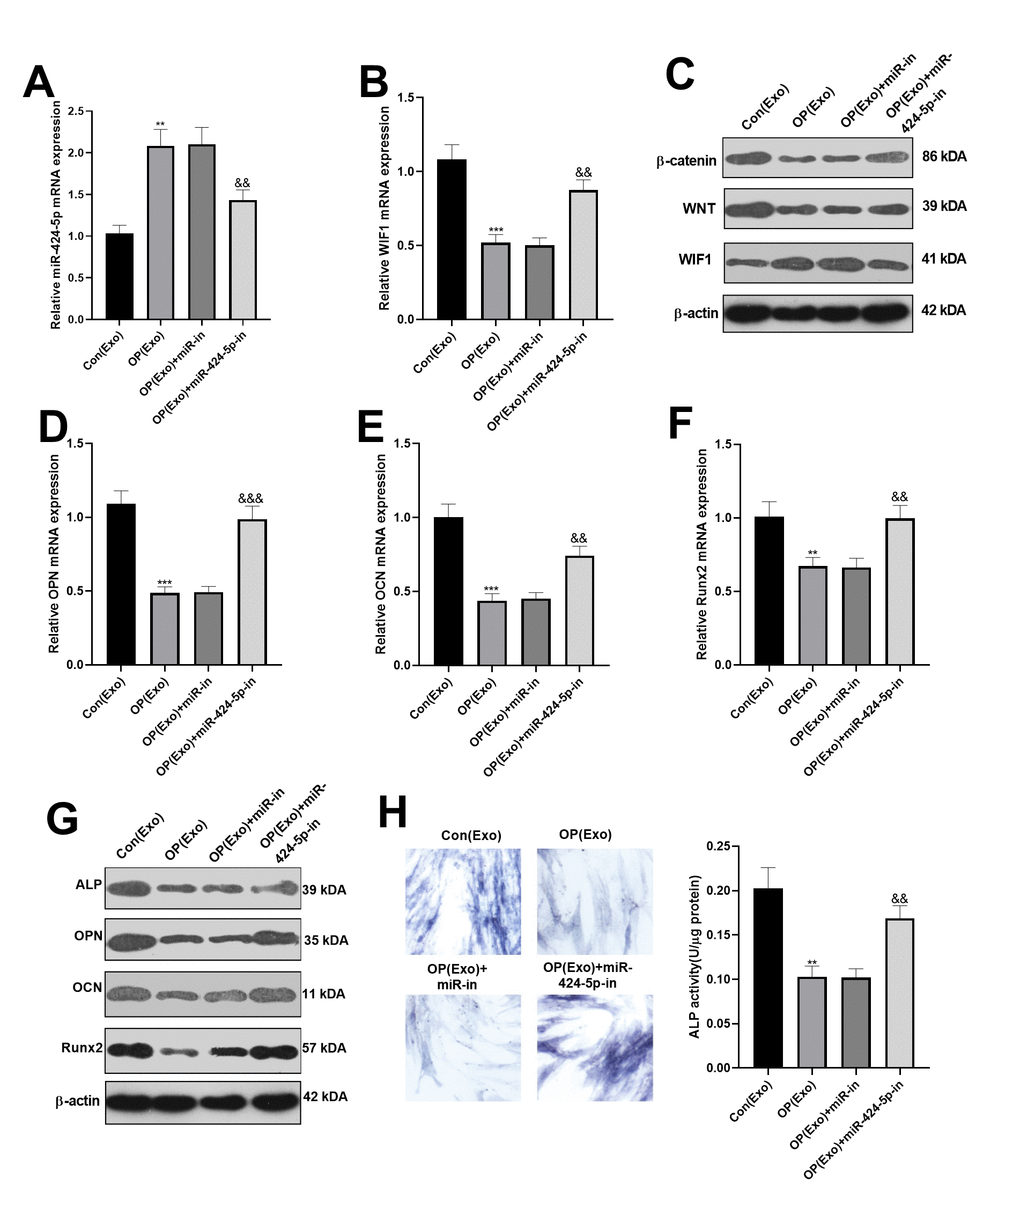 Dampening miR-424-5p expression in exosomes enhanced osteogenic differentiation of BMSCs. MiR-424-5p inhibitors were transfected into BMSCs-derived exosomes, which were then co-cultured with BMSCs for 7 days. (A, B) The expression of miR-424-5p and WIF1 were detected by qRT-PCR. (C) Western blot was adopted to test the protein expression of WIF1/Wnt/β-catenin. (D–F) QRT-PCR was implemented to verify the mRNA expression of OPN, OCN and Runx2. (G) Western blot was employed to monitor the protein expression of OPN, OCN and Runx2. (H) ALP staining. **PPPP